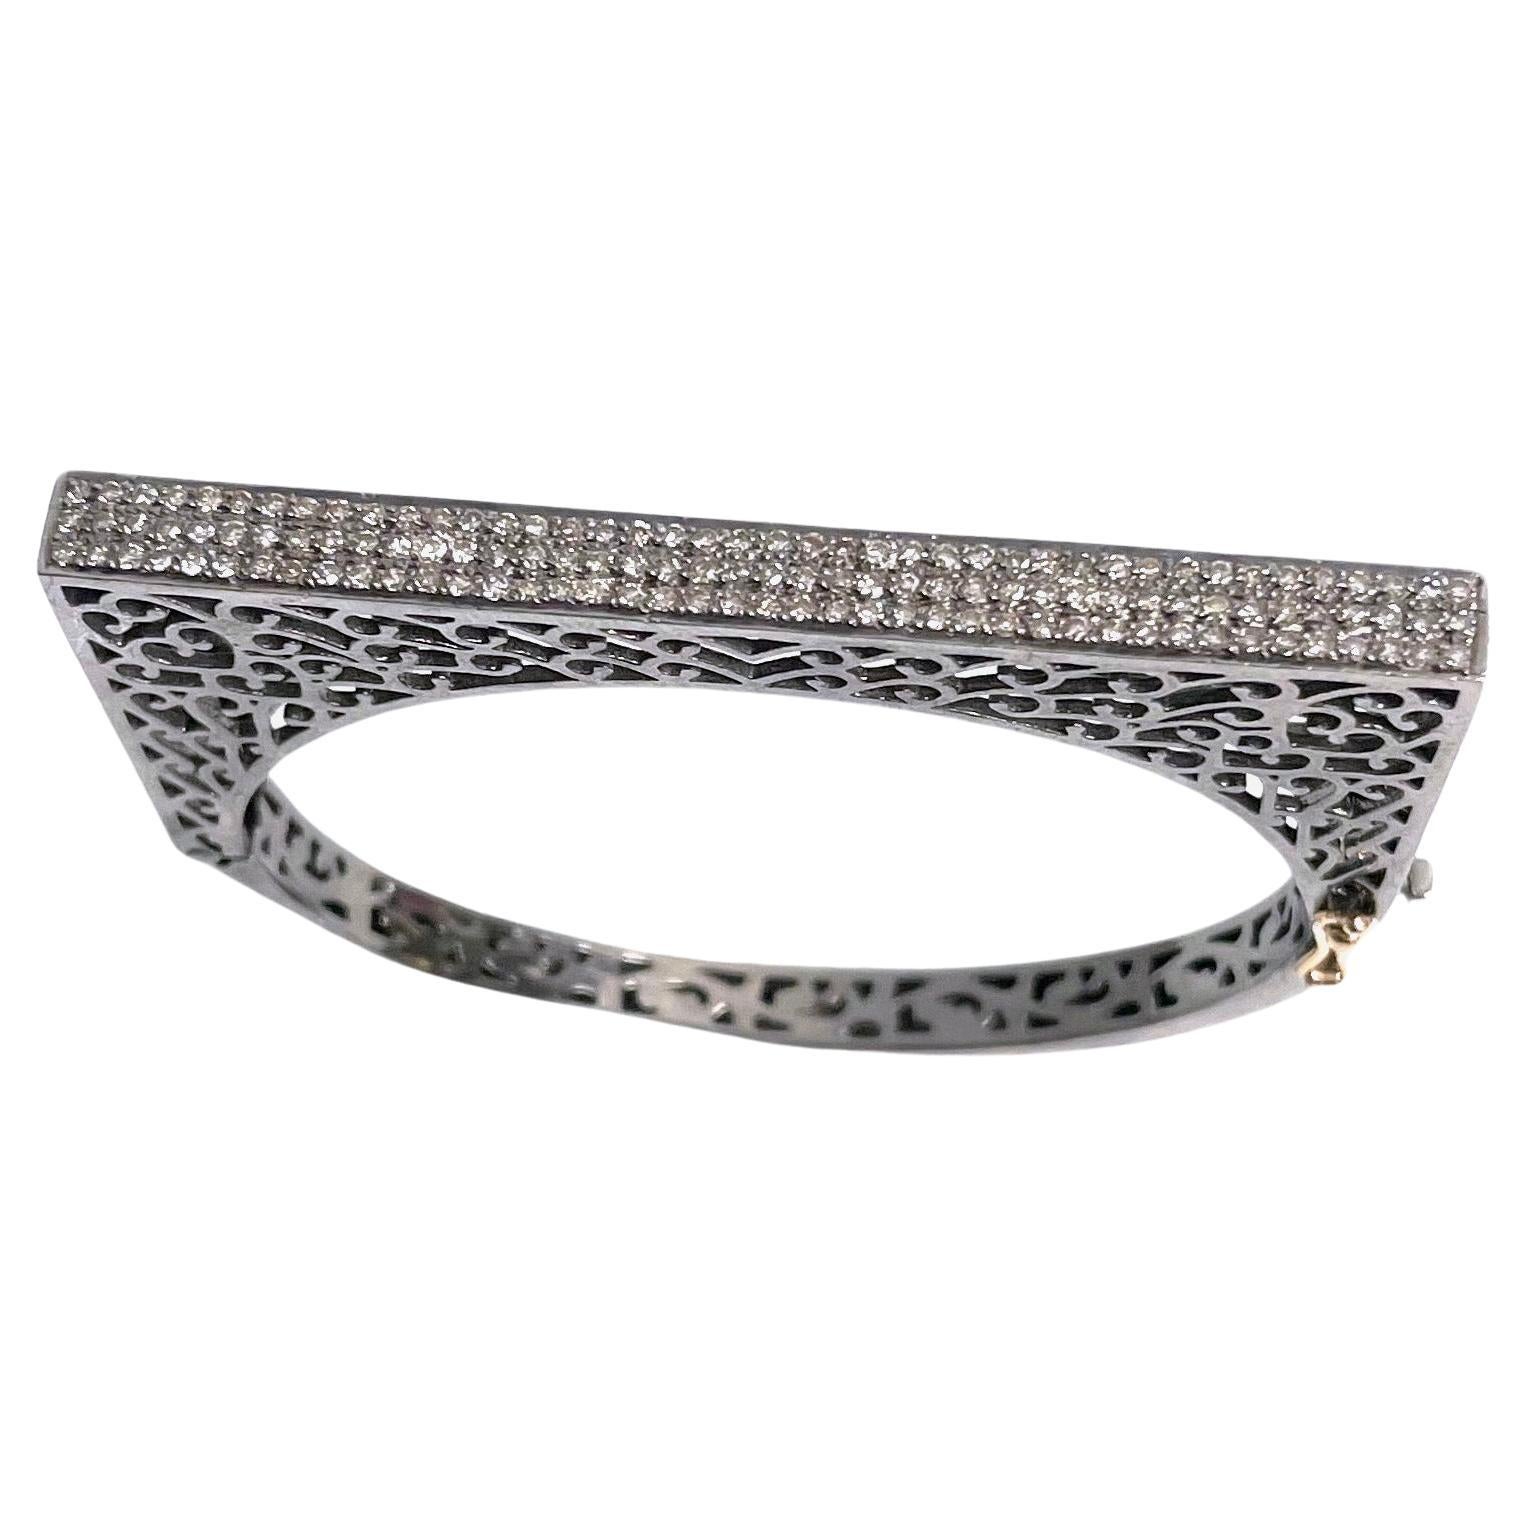 Description
This chic and unique statement bracelet, artfully designed and exquisitely crafted with intricate latticework holds three rows of sparkling diamonds adorning the top and sides. With its sleek and contemporary design, this piece features